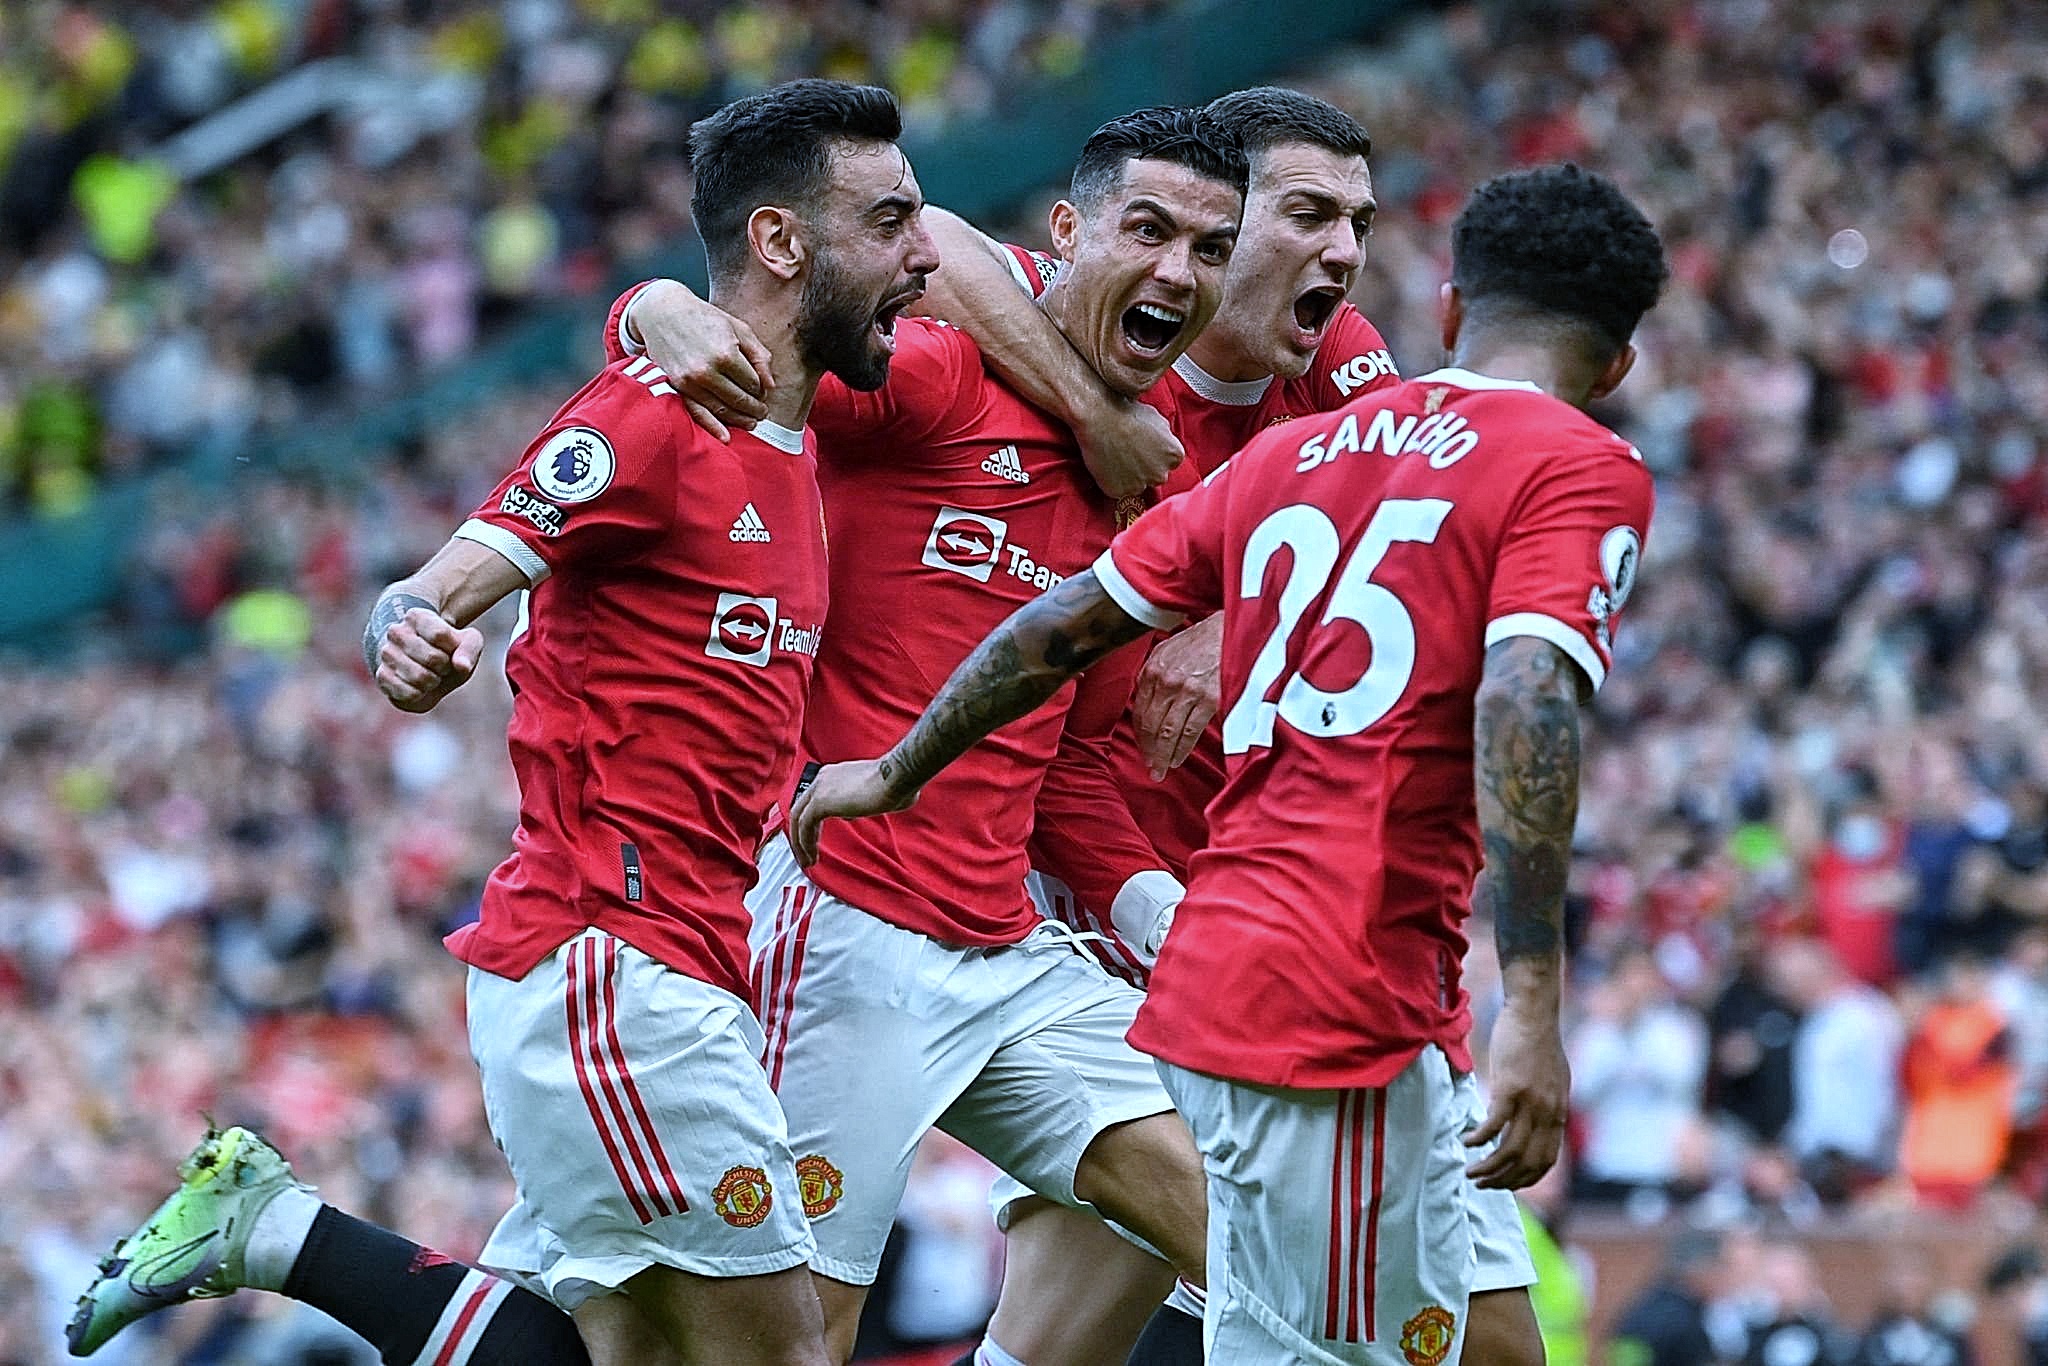 Manchester United 3 - 2 Norwich